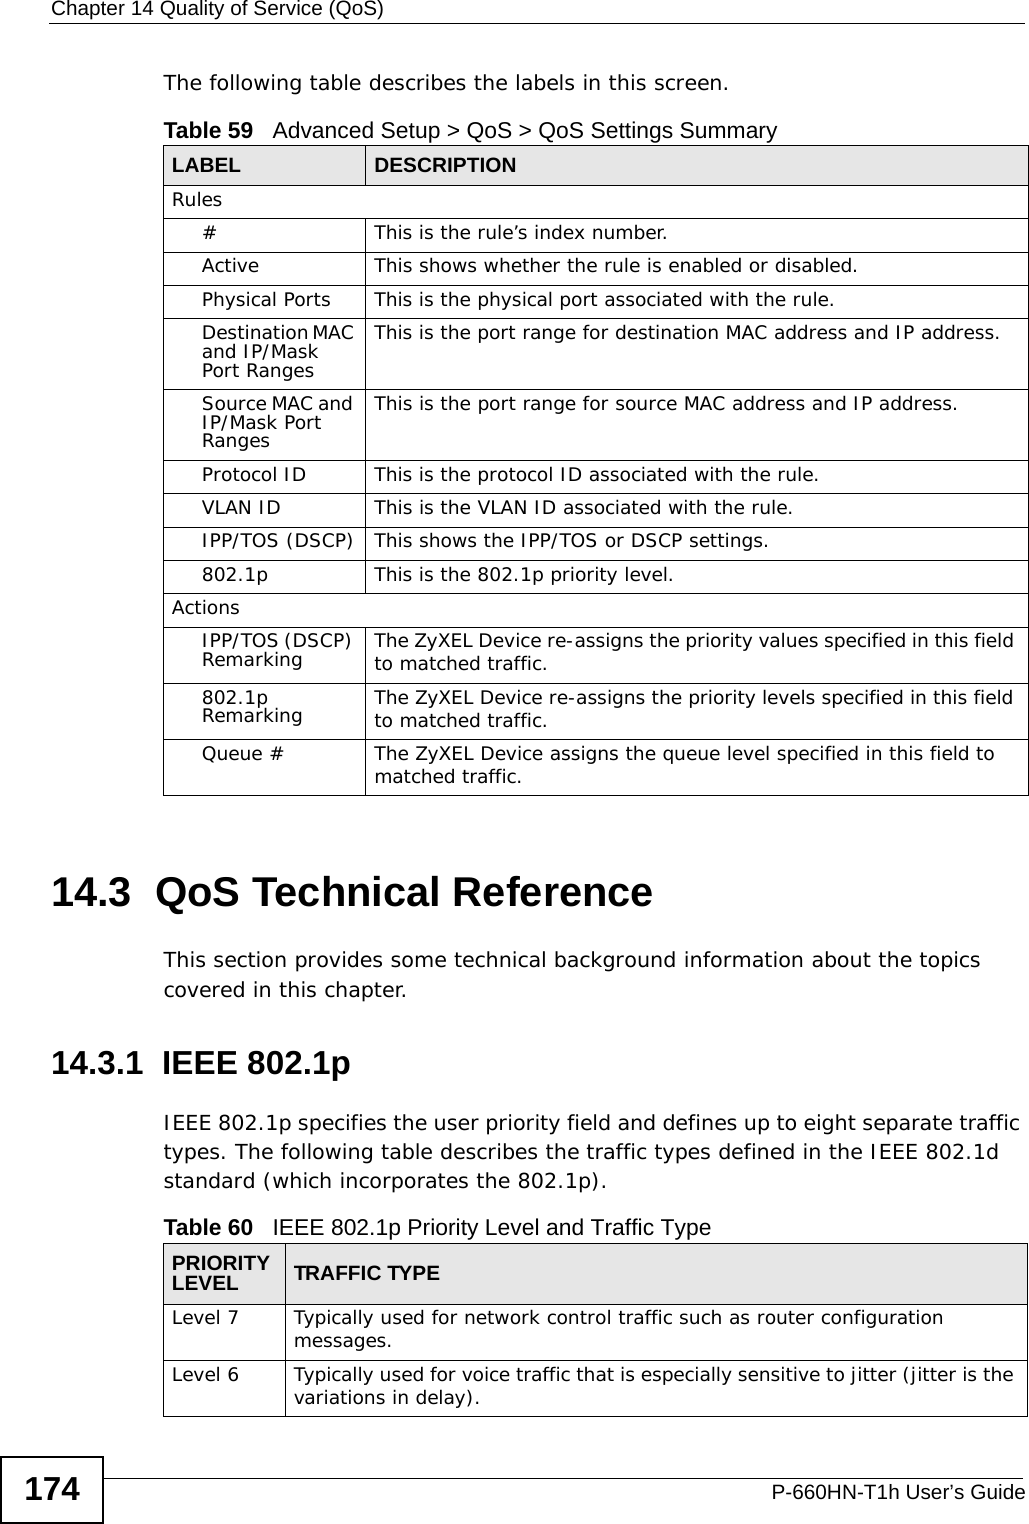 Chapter 14 Quality of Service (QoS)P-660HN-T1h User’s Guide174The following table describes the labels in this screen.  14.3  QoS Technical ReferenceThis section provides some technical background information about the topics covered in this chapter.14.3.1  IEEE 802.1pIEEE 802.1p specifies the user priority field and defines up to eight separate traffic types. The following table describes the traffic types defined in the IEEE 802.1d standard (which incorporates the 802.1p). Table 59   Advanced Setup &gt; QoS &gt; QoS Settings SummaryLABEL DESCRIPTIONRules#This is the rule’s index number.Active This shows whether the rule is enabled or disabled.Physical Ports This is the physical port associated with the rule.Destination MAC and IP/Mask Port RangesThis is the port range for destination MAC address and IP address.Source MAC and IP/Mask Port RangesThis is the port range for source MAC address and IP address.Protocol ID This is the protocol ID associated with the rule.VLAN ID This is the VLAN ID associated with the rule.IPP/TOS (DSCP) This shows the IPP/TOS or DSCP settings.802.1p This is the 802.1p priority level.ActionsIPP/TOS (DSCP) Remarking The ZyXEL Device re-assigns the priority values specified in this field to matched traffic.802.1p Remarking The ZyXEL Device re-assigns the priority levels specified in this field to matched traffic.Queue # The ZyXEL Device assigns the queue level specified in this field to matched traffic.Table 60   IEEE 802.1p Priority Level and Traffic TypePRIORITY LEVEL TRAFFIC TYPELevel 7 Typically used for network control traffic such as router configuration messages.Level 6 Typically used for voice traffic that is especially sensitive to jitter (jitter is the variations in delay).